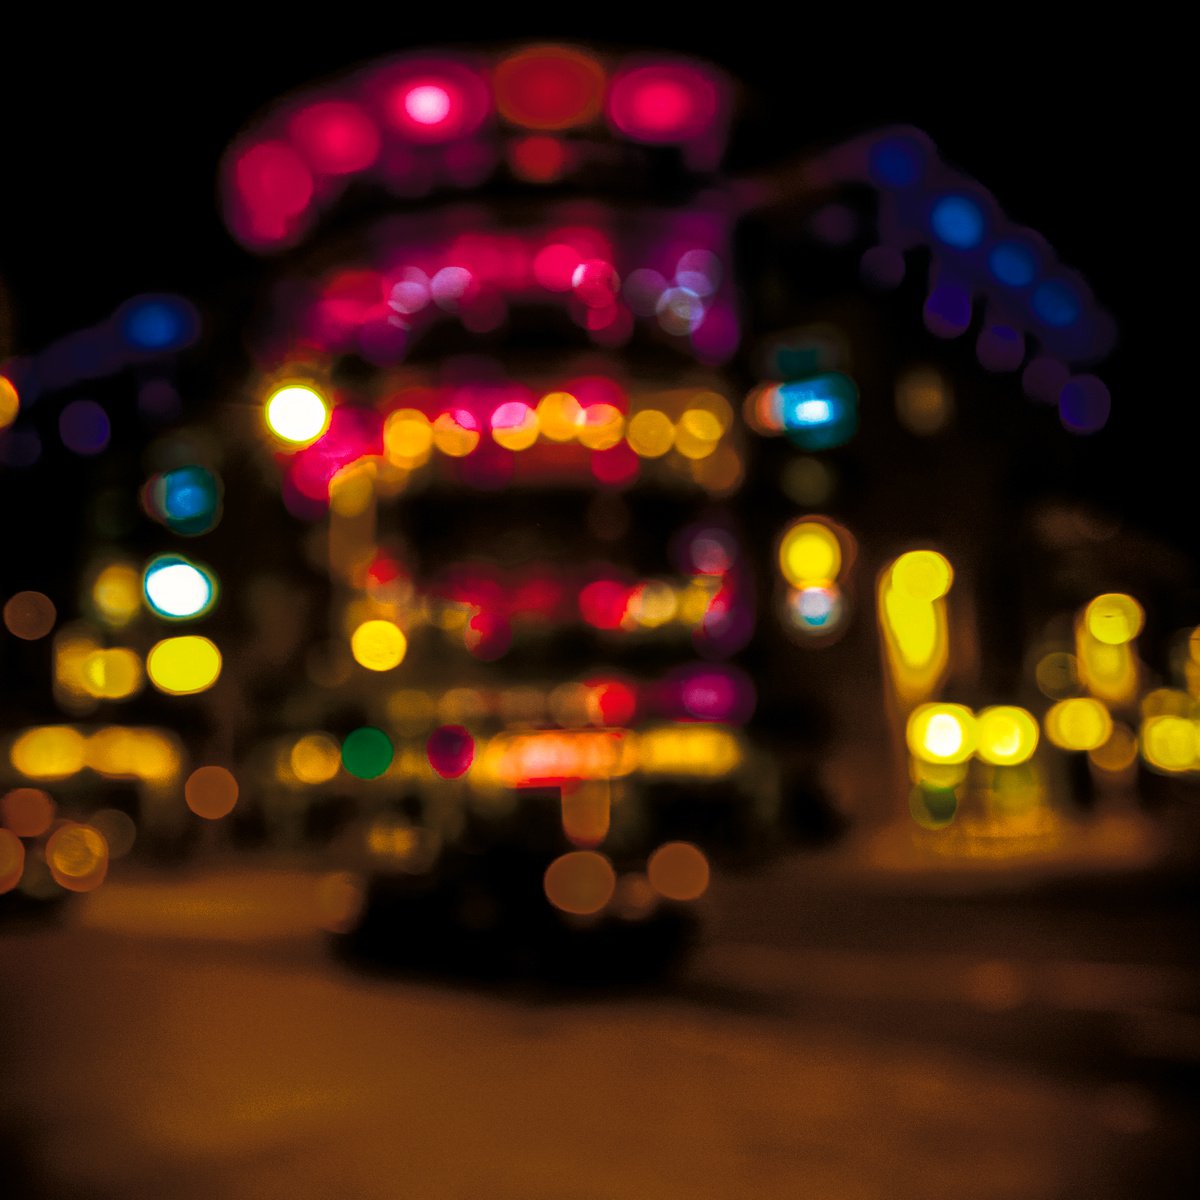 City Lights 9. Limited Edition Abstract Photograph Print #1/15. Nighttime abstract photog... by Graham Briggs